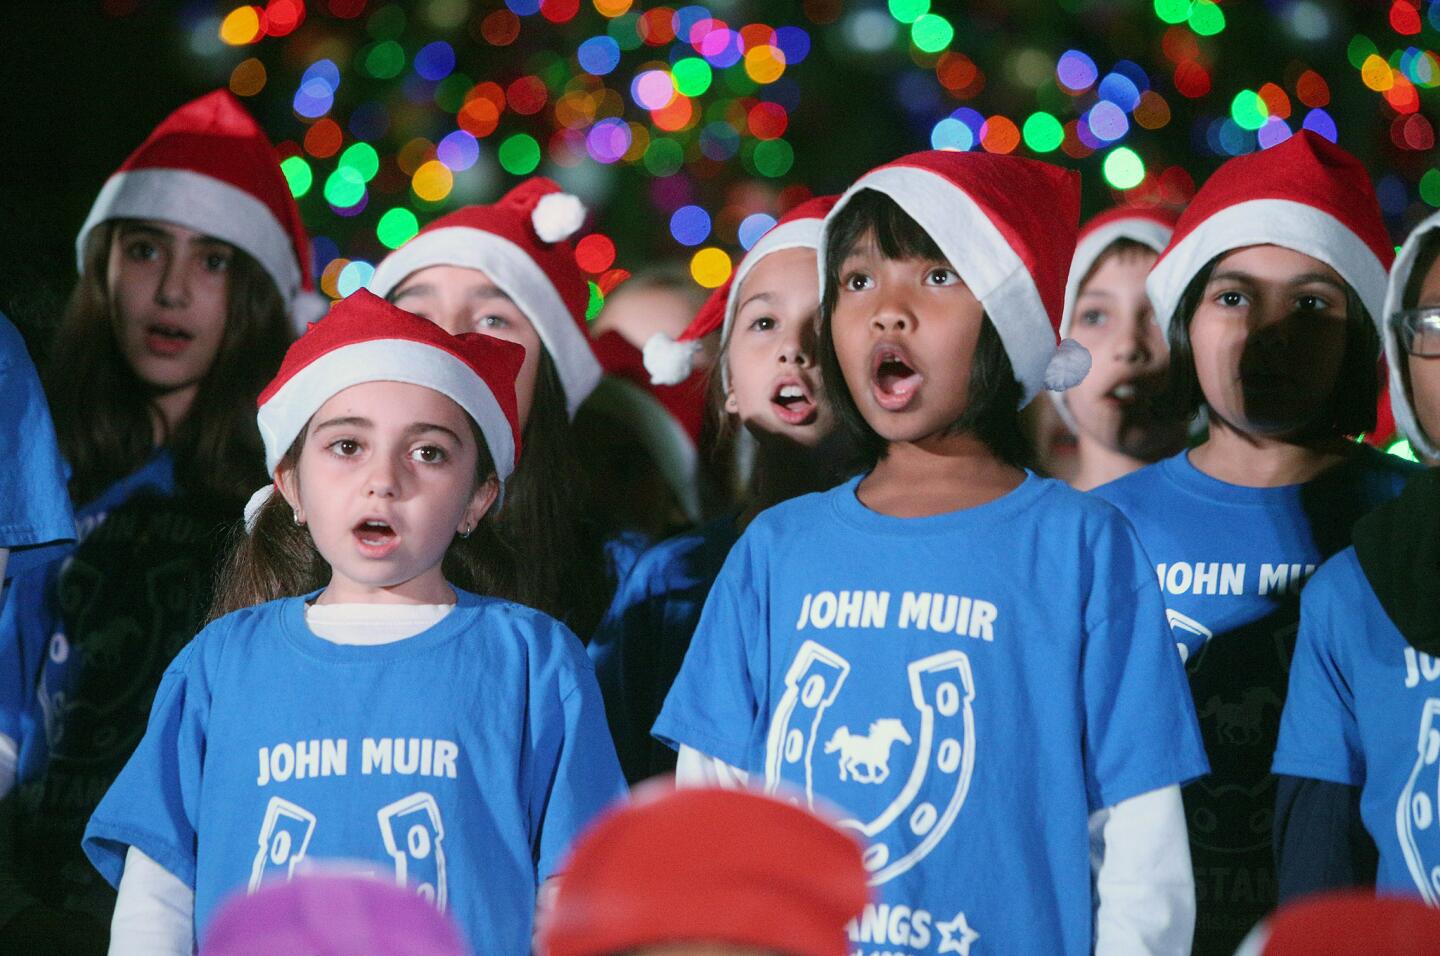 Photo Gallery: Glendale Holiday Tree Lighting Ceremony and Cram-A-Classic Toy Drive